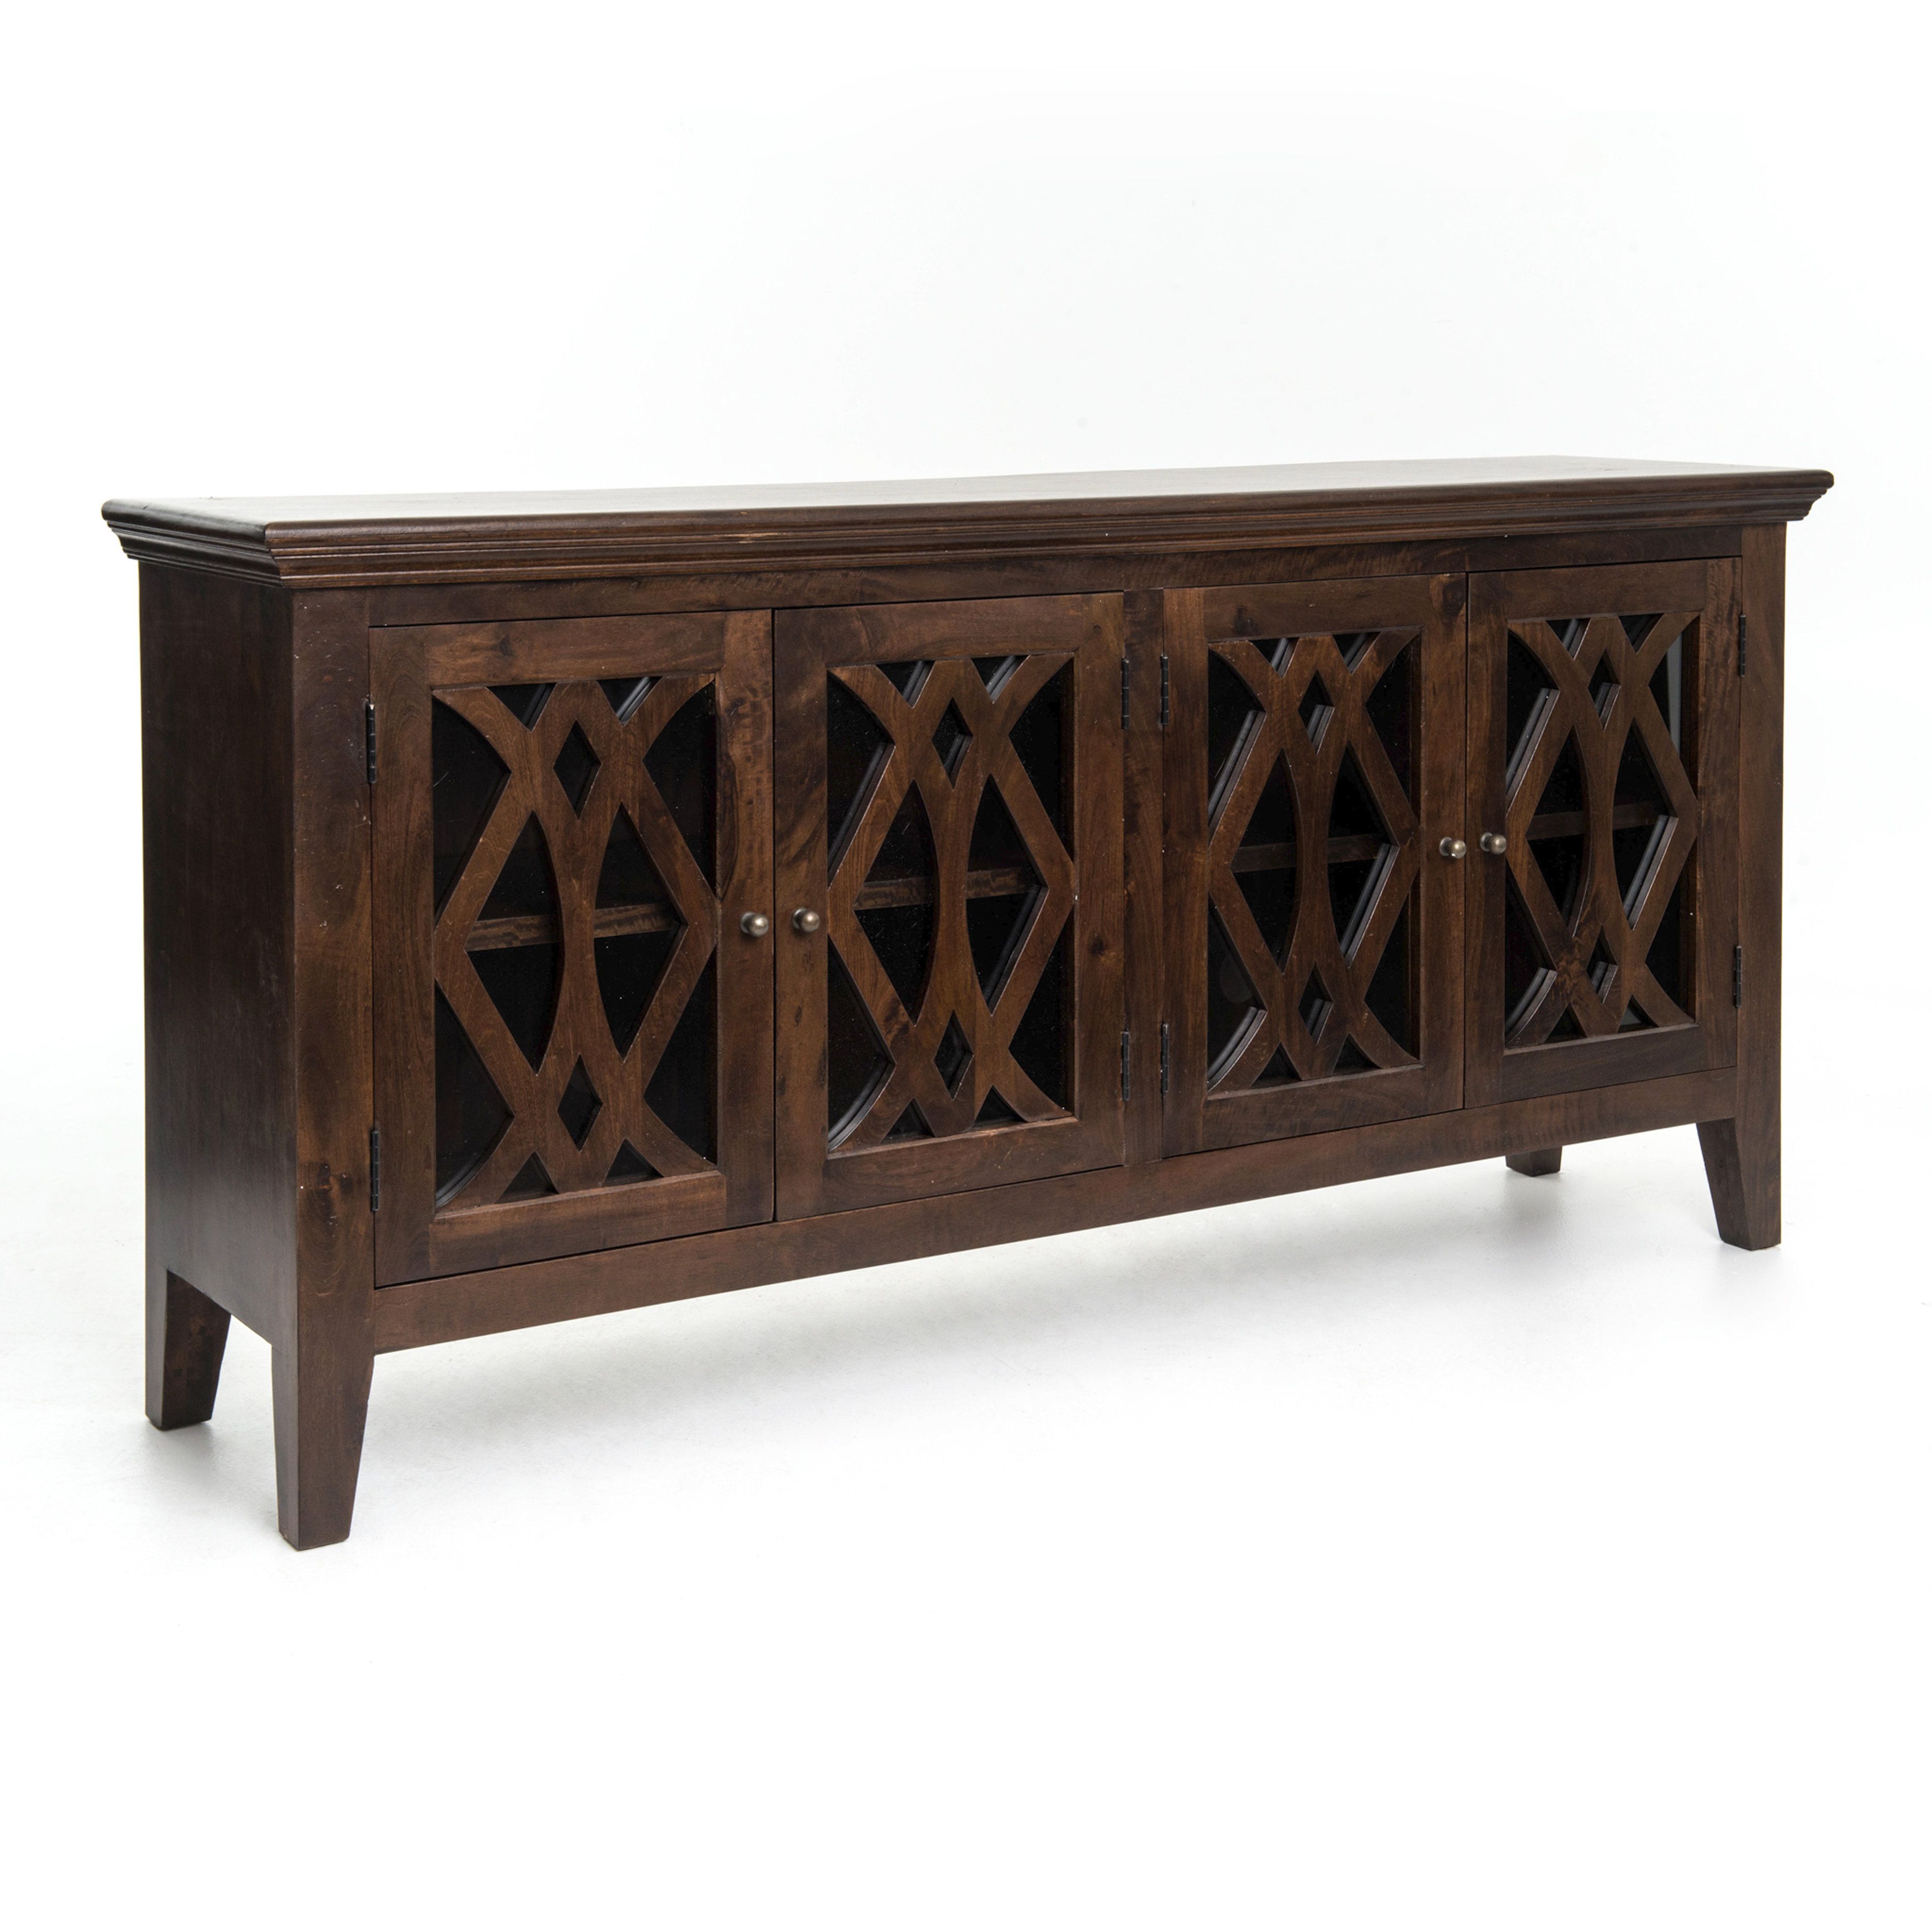 Eclectic Sideboards & Buffets | Birch Lane With Regard To Candide Wood Credenzas (View 5 of 20)